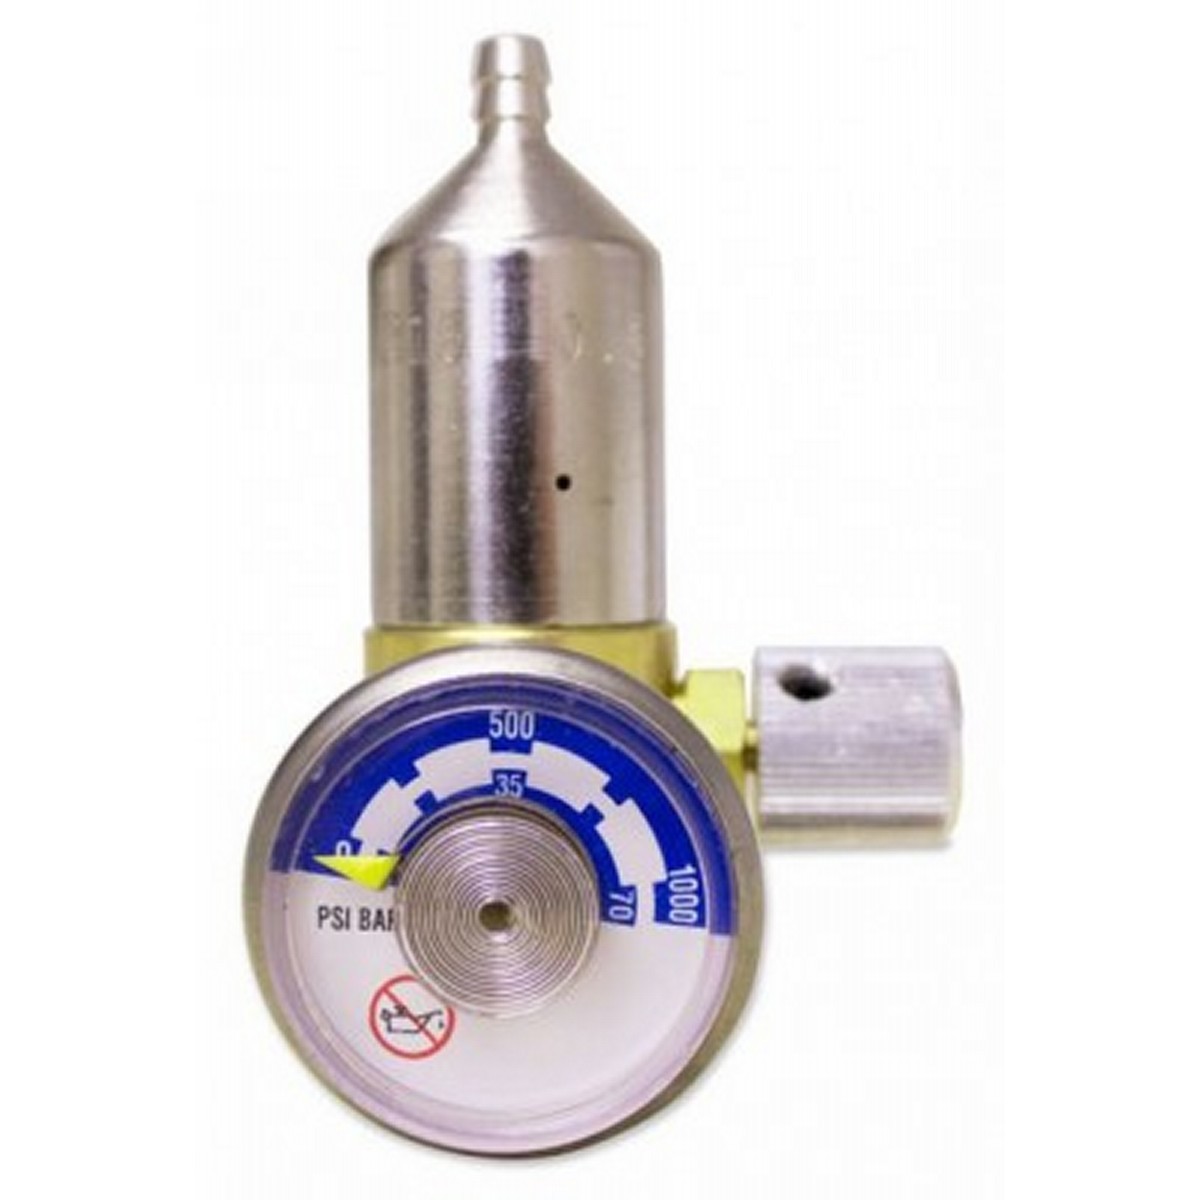 BW Technologies by Honeywell .5 LPM Stainless Steel Calibration Gas Regulator For Calibration Gases